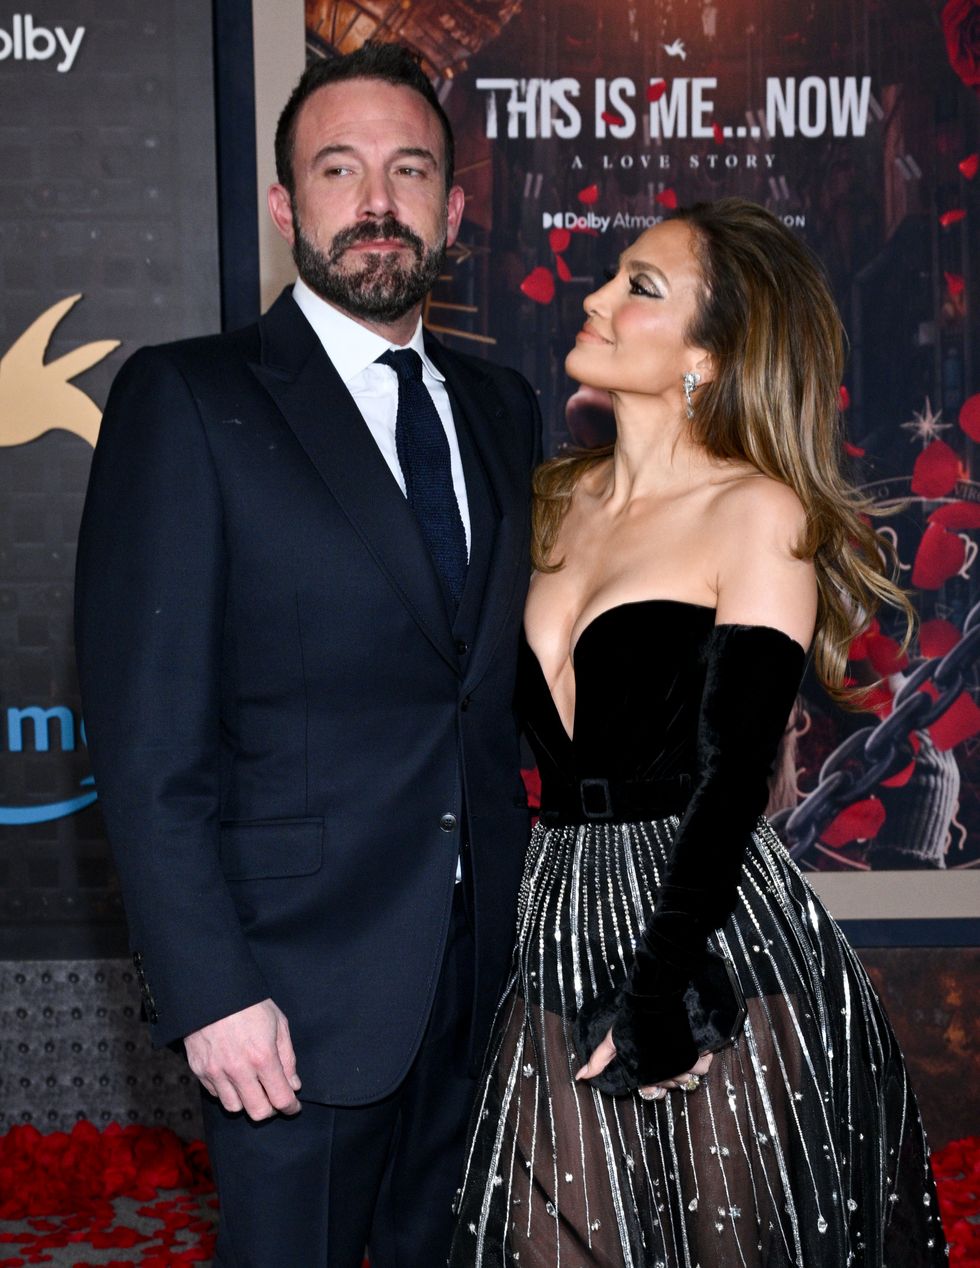 Jennifer Lopez’s Steamiest Lyrics About Ben Affleck From Her New Album, This Is Me … Now